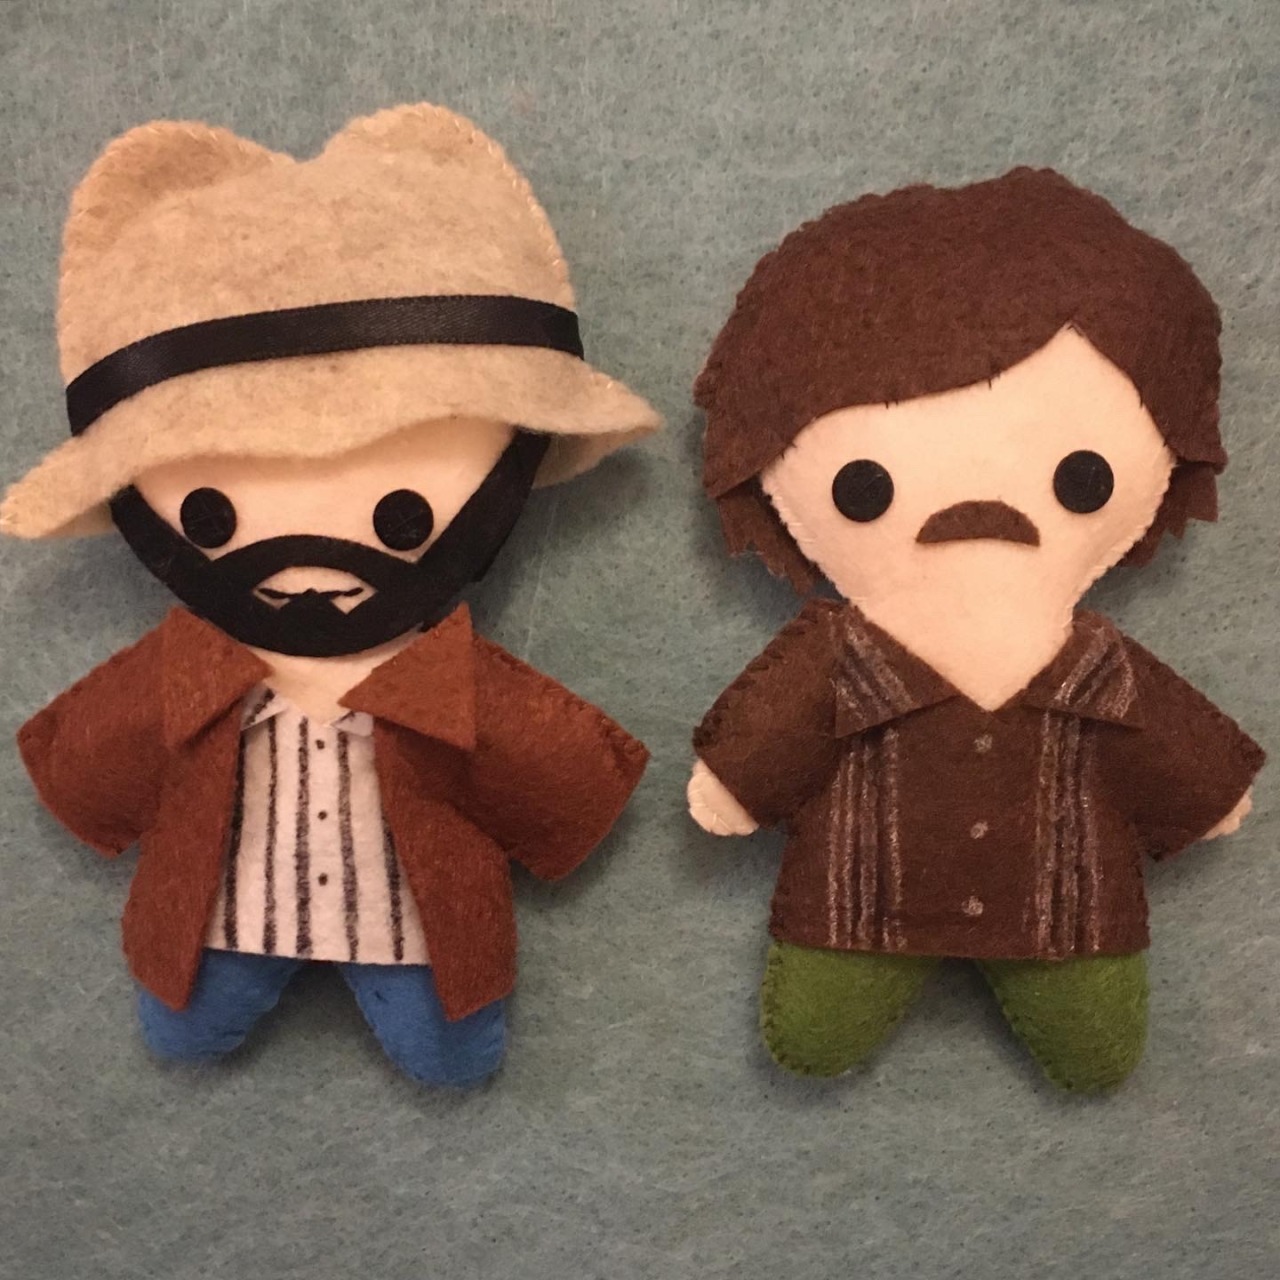 Such a fun commission of what, based on the trailer, looks like a fun movie.. #the unbearable weight of massive talent #nicolas cage#Pedro Pascal#felt plush#felt plushie#stitching#kawaii